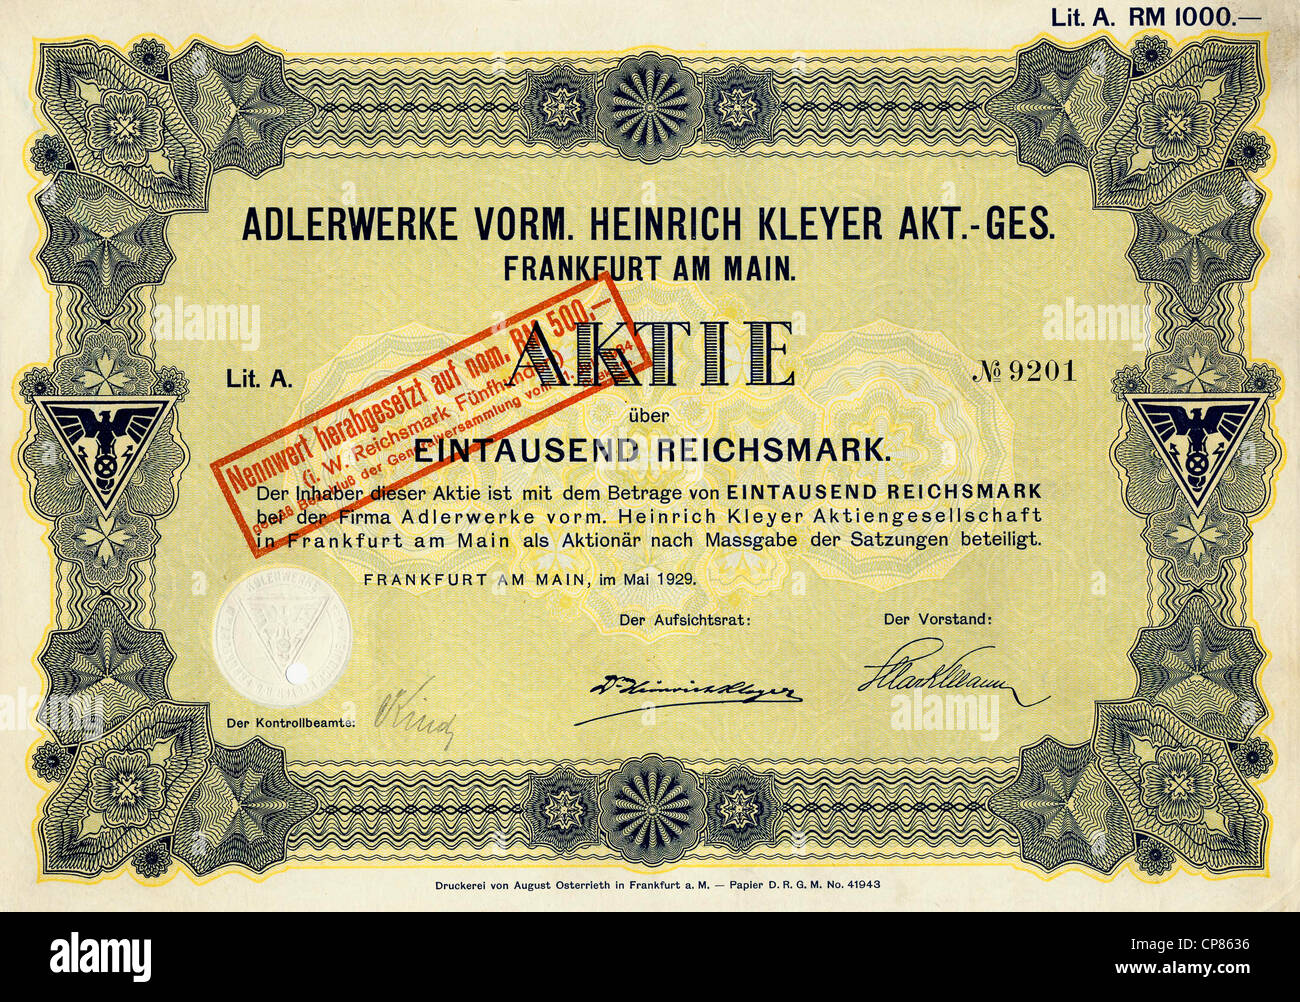 Historic share certificate, 1000 reichsmarks, a former car company and mechanical engineering company for bicycles, cars, motorc Stock Photo